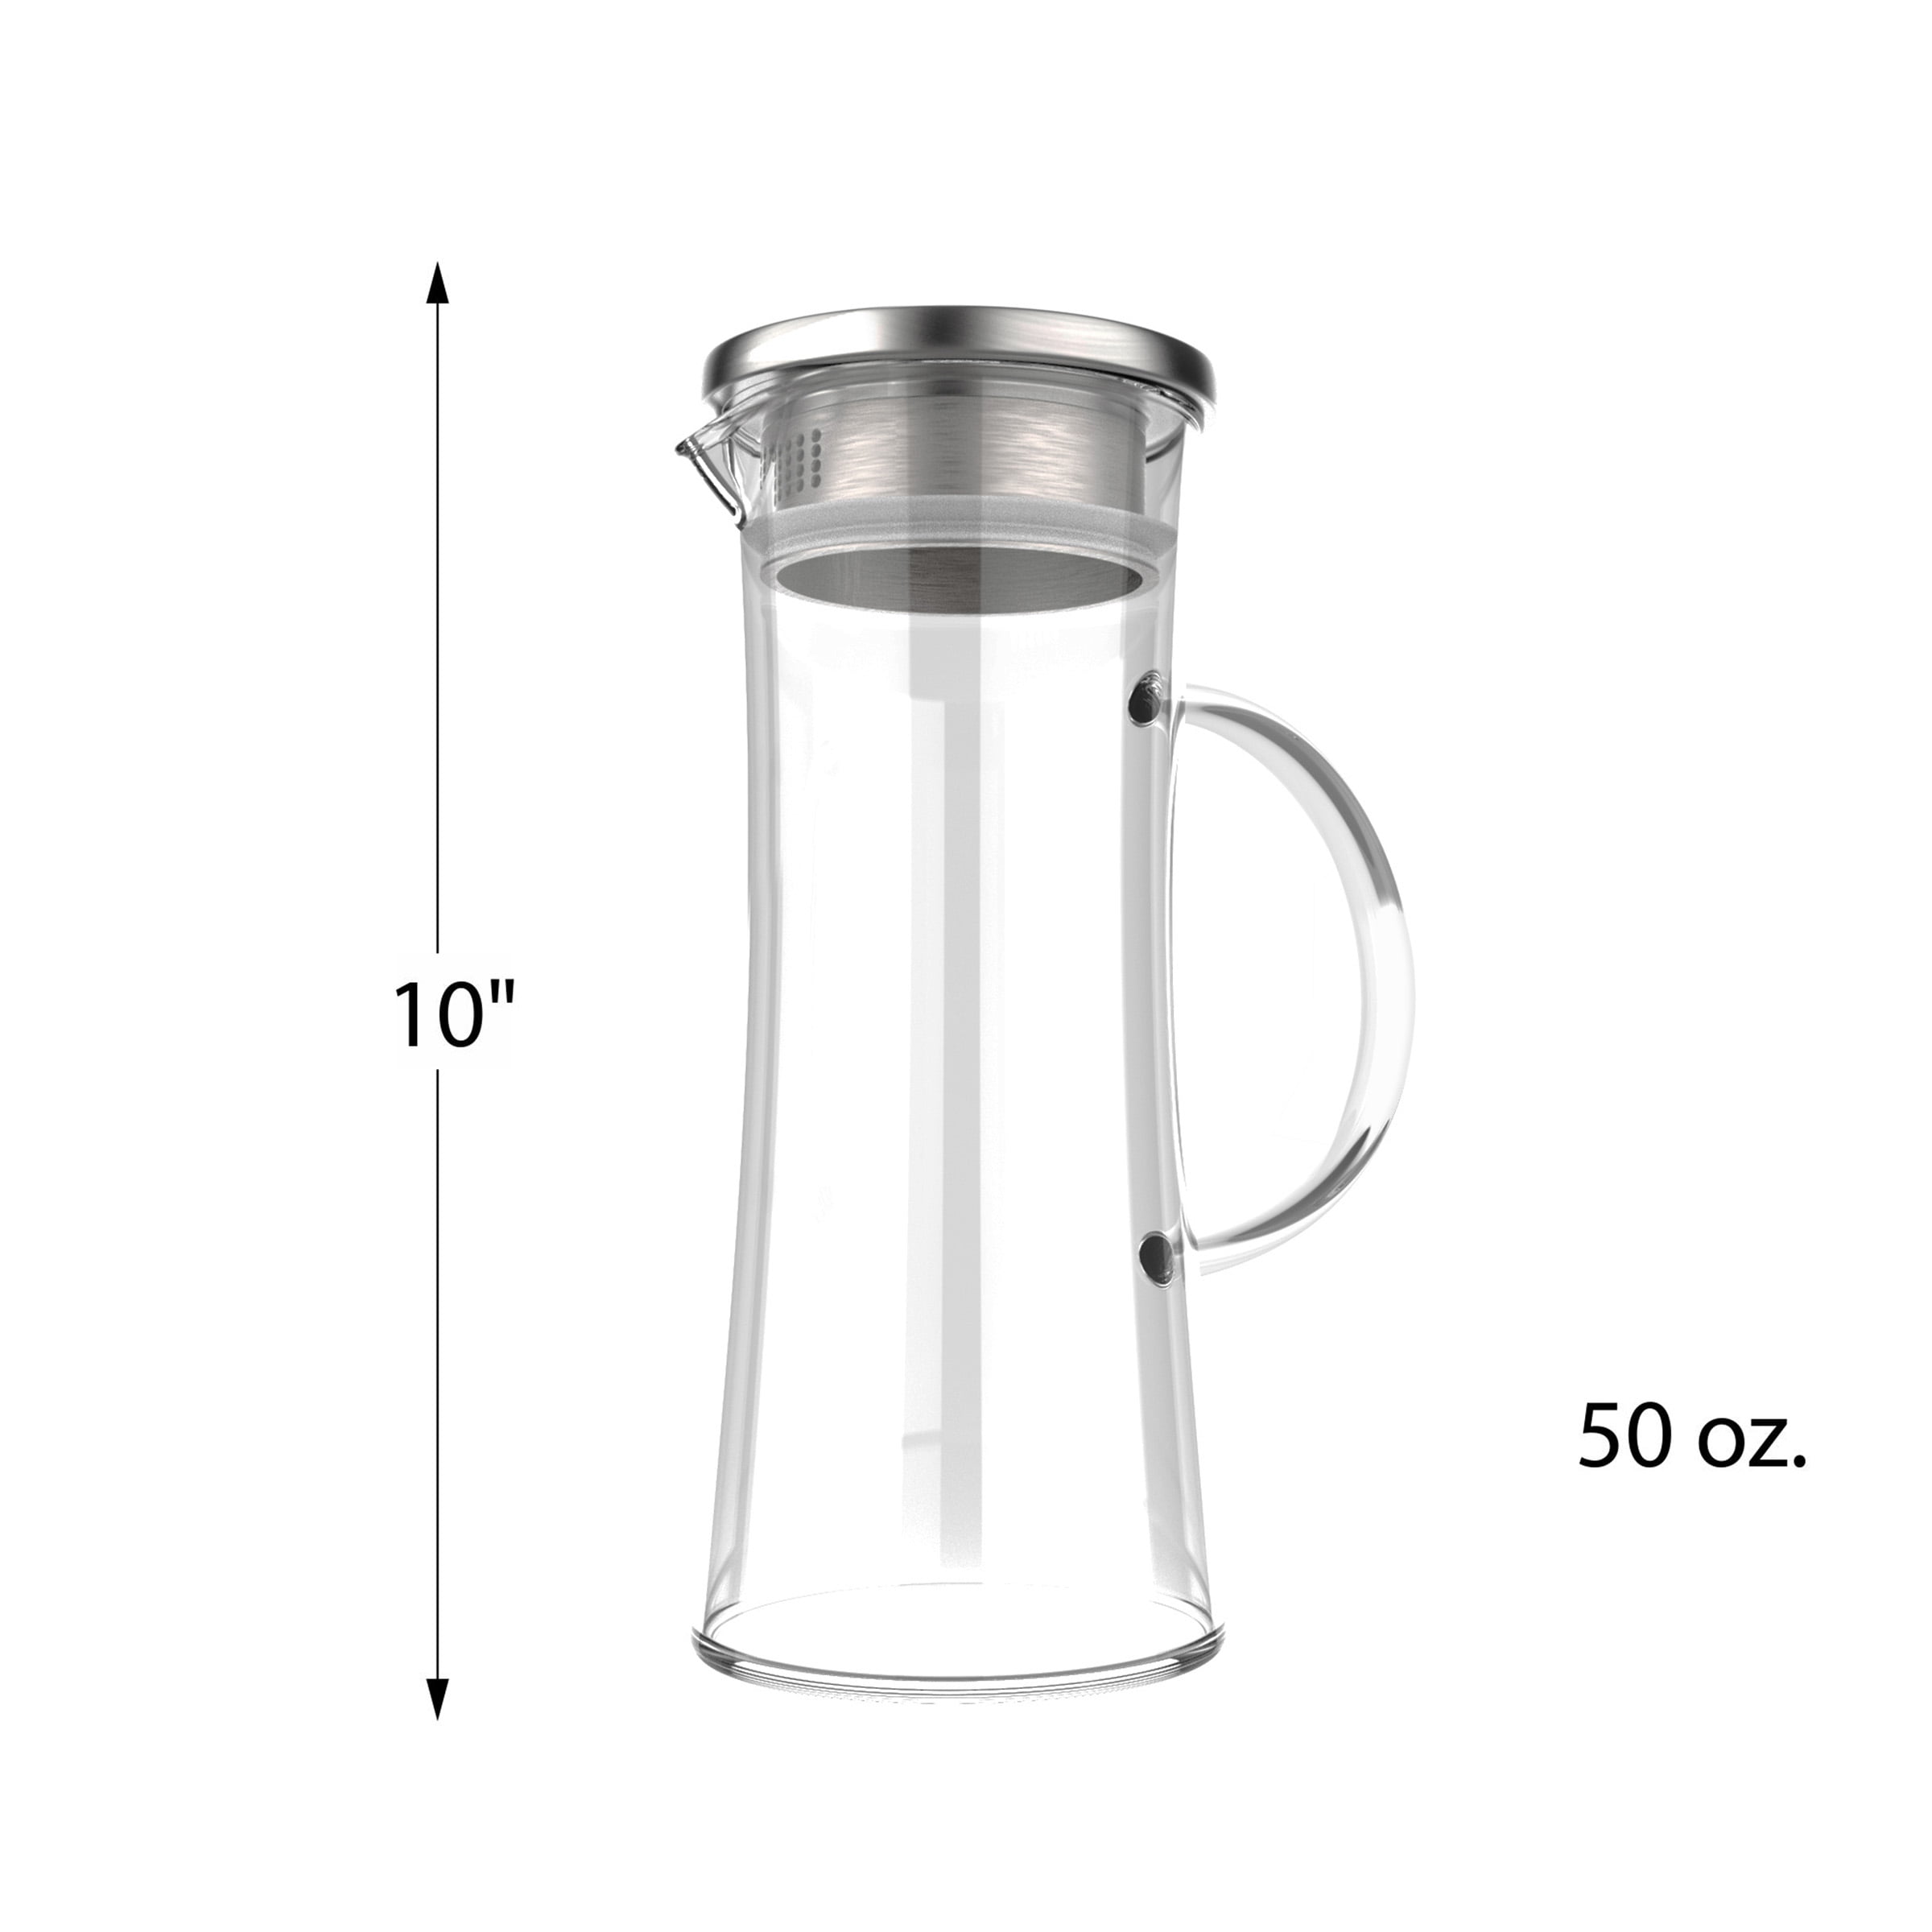 1pc/1 Set, Glass Pitcher And 4pcs Cups, 50oz/64oz Heavy Duty Water Pitcher,  Heat Resistant Drink Carafe, For Hot And Cold Beverges, Summer Winter